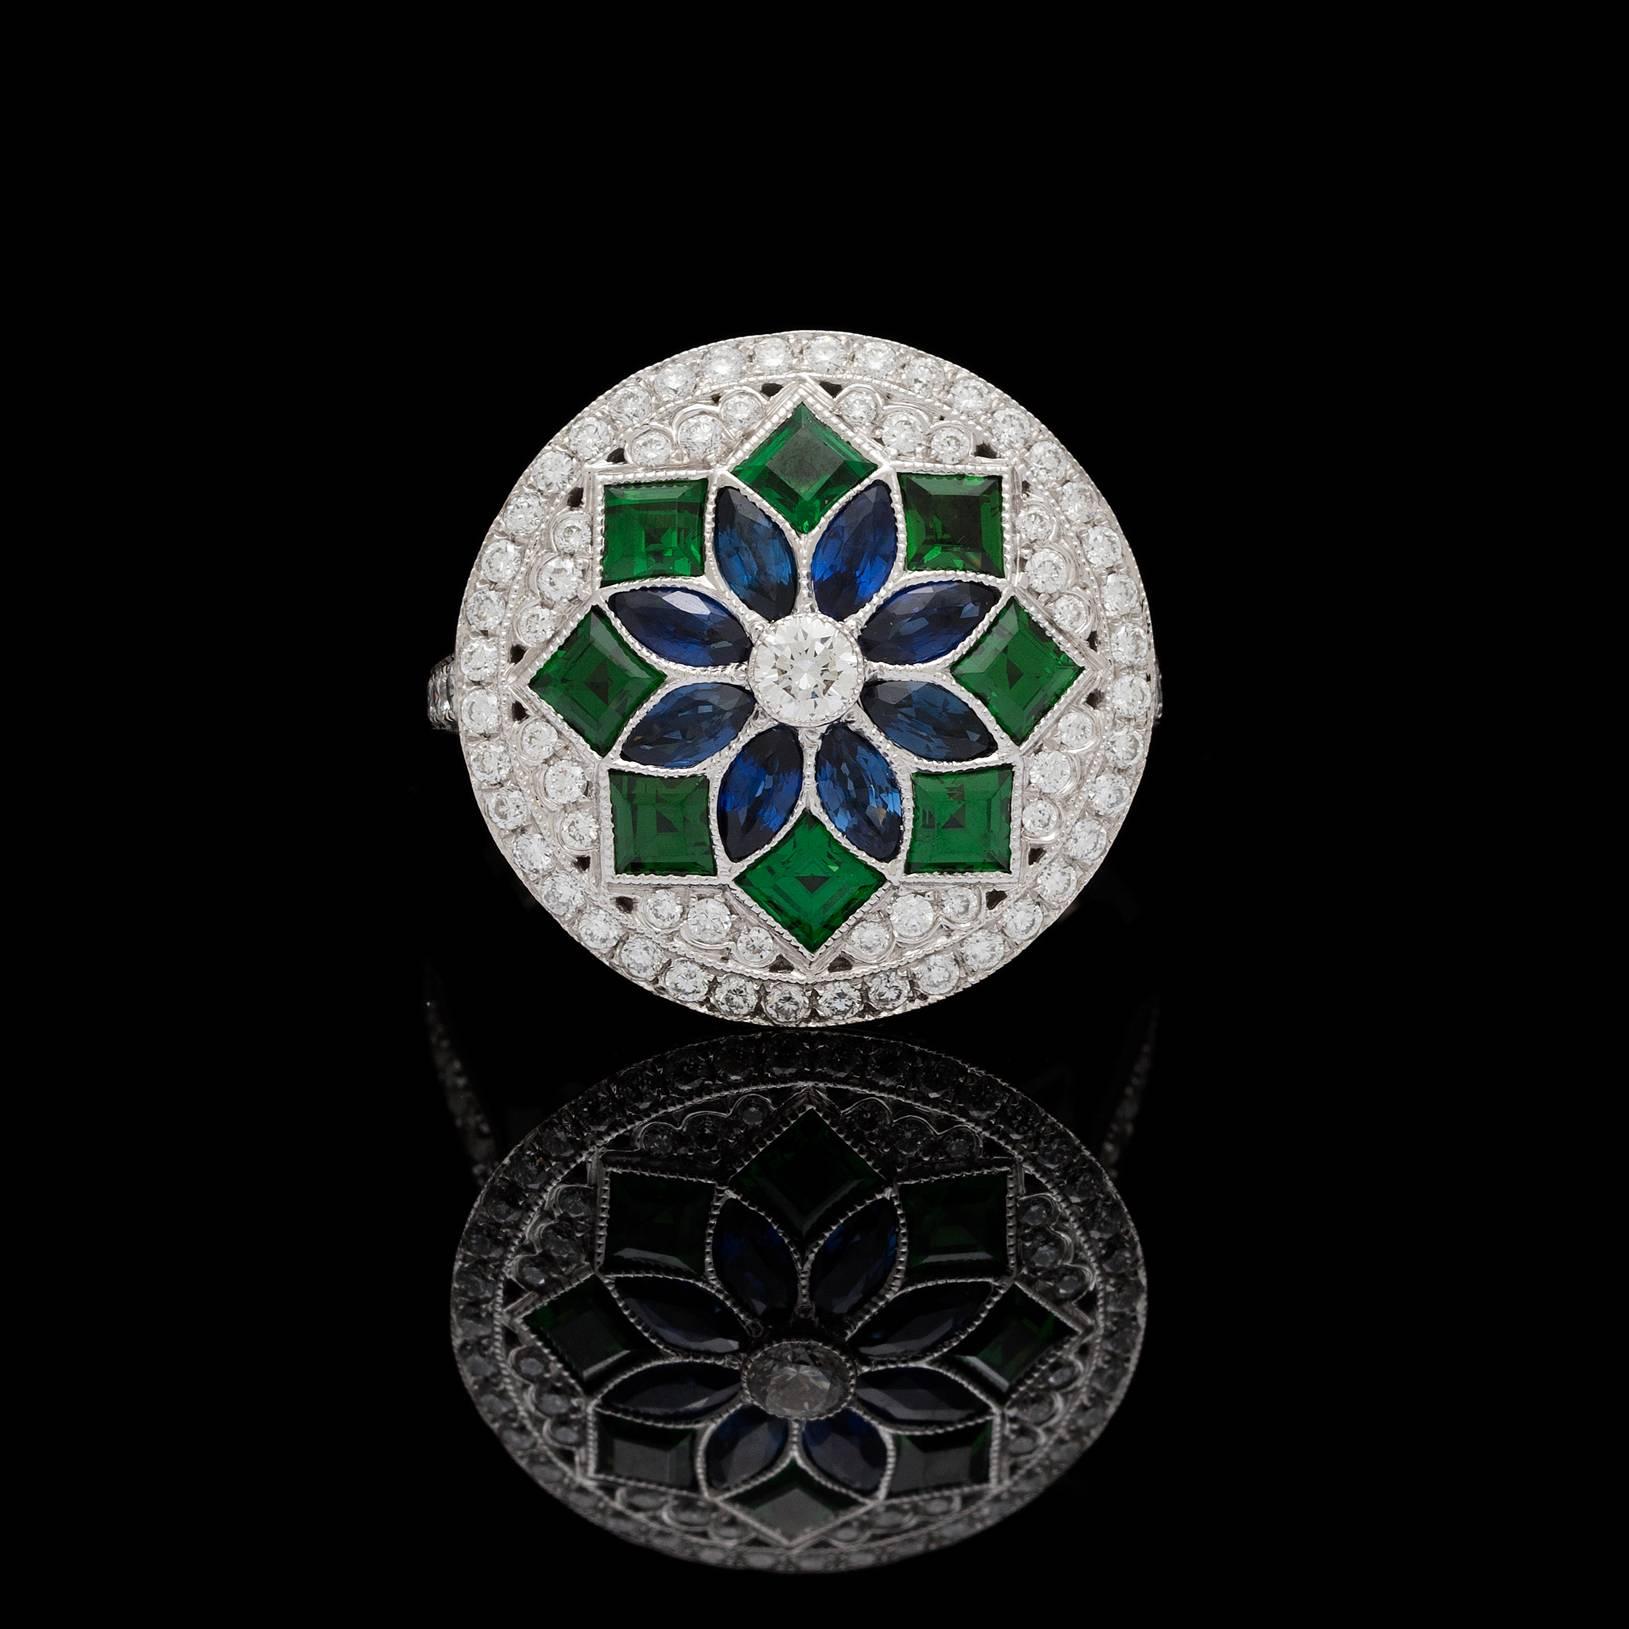 18k white gold Deco style ring features 1.00 carat blue sapphires and 1.20 carat green garnets in a mosaic pattern enhanced with 167 round brilliant cut diamonds weighing 1.73 carat total weight. The ring measures 19.5mm to 1.75mm and is currently a